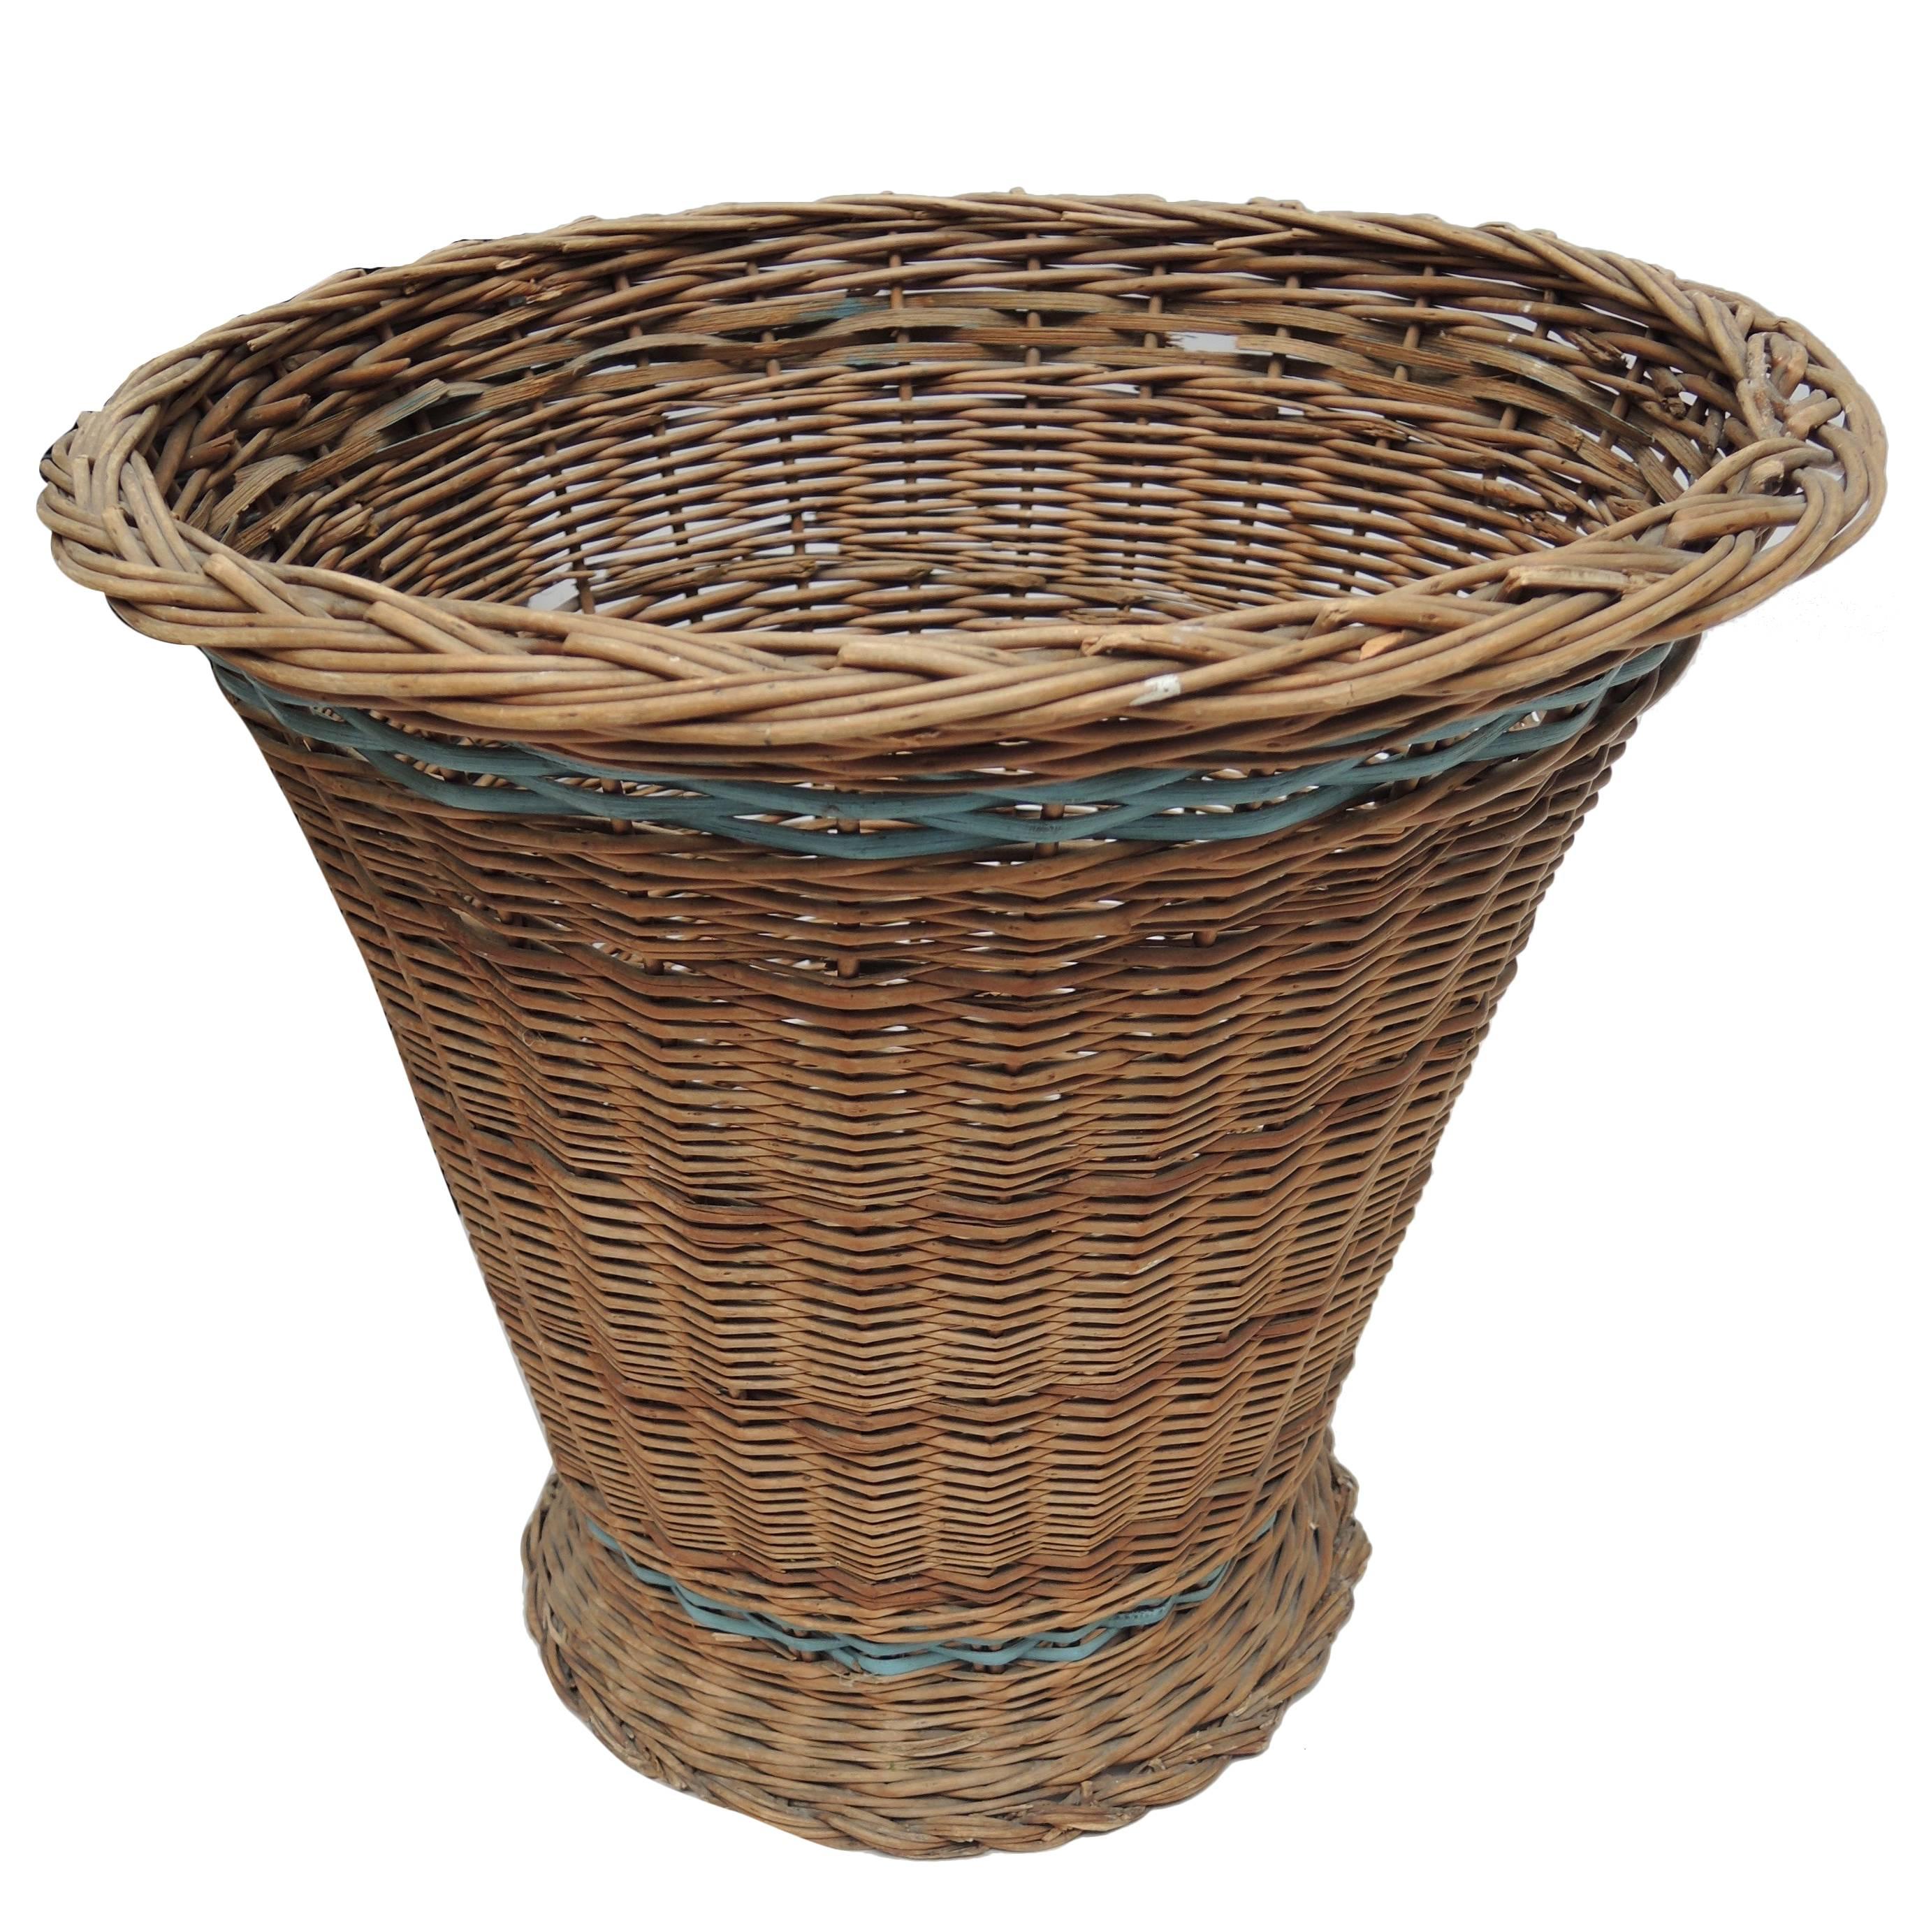 Vintage French Woven Wicker Trash Can with Blue Stripe